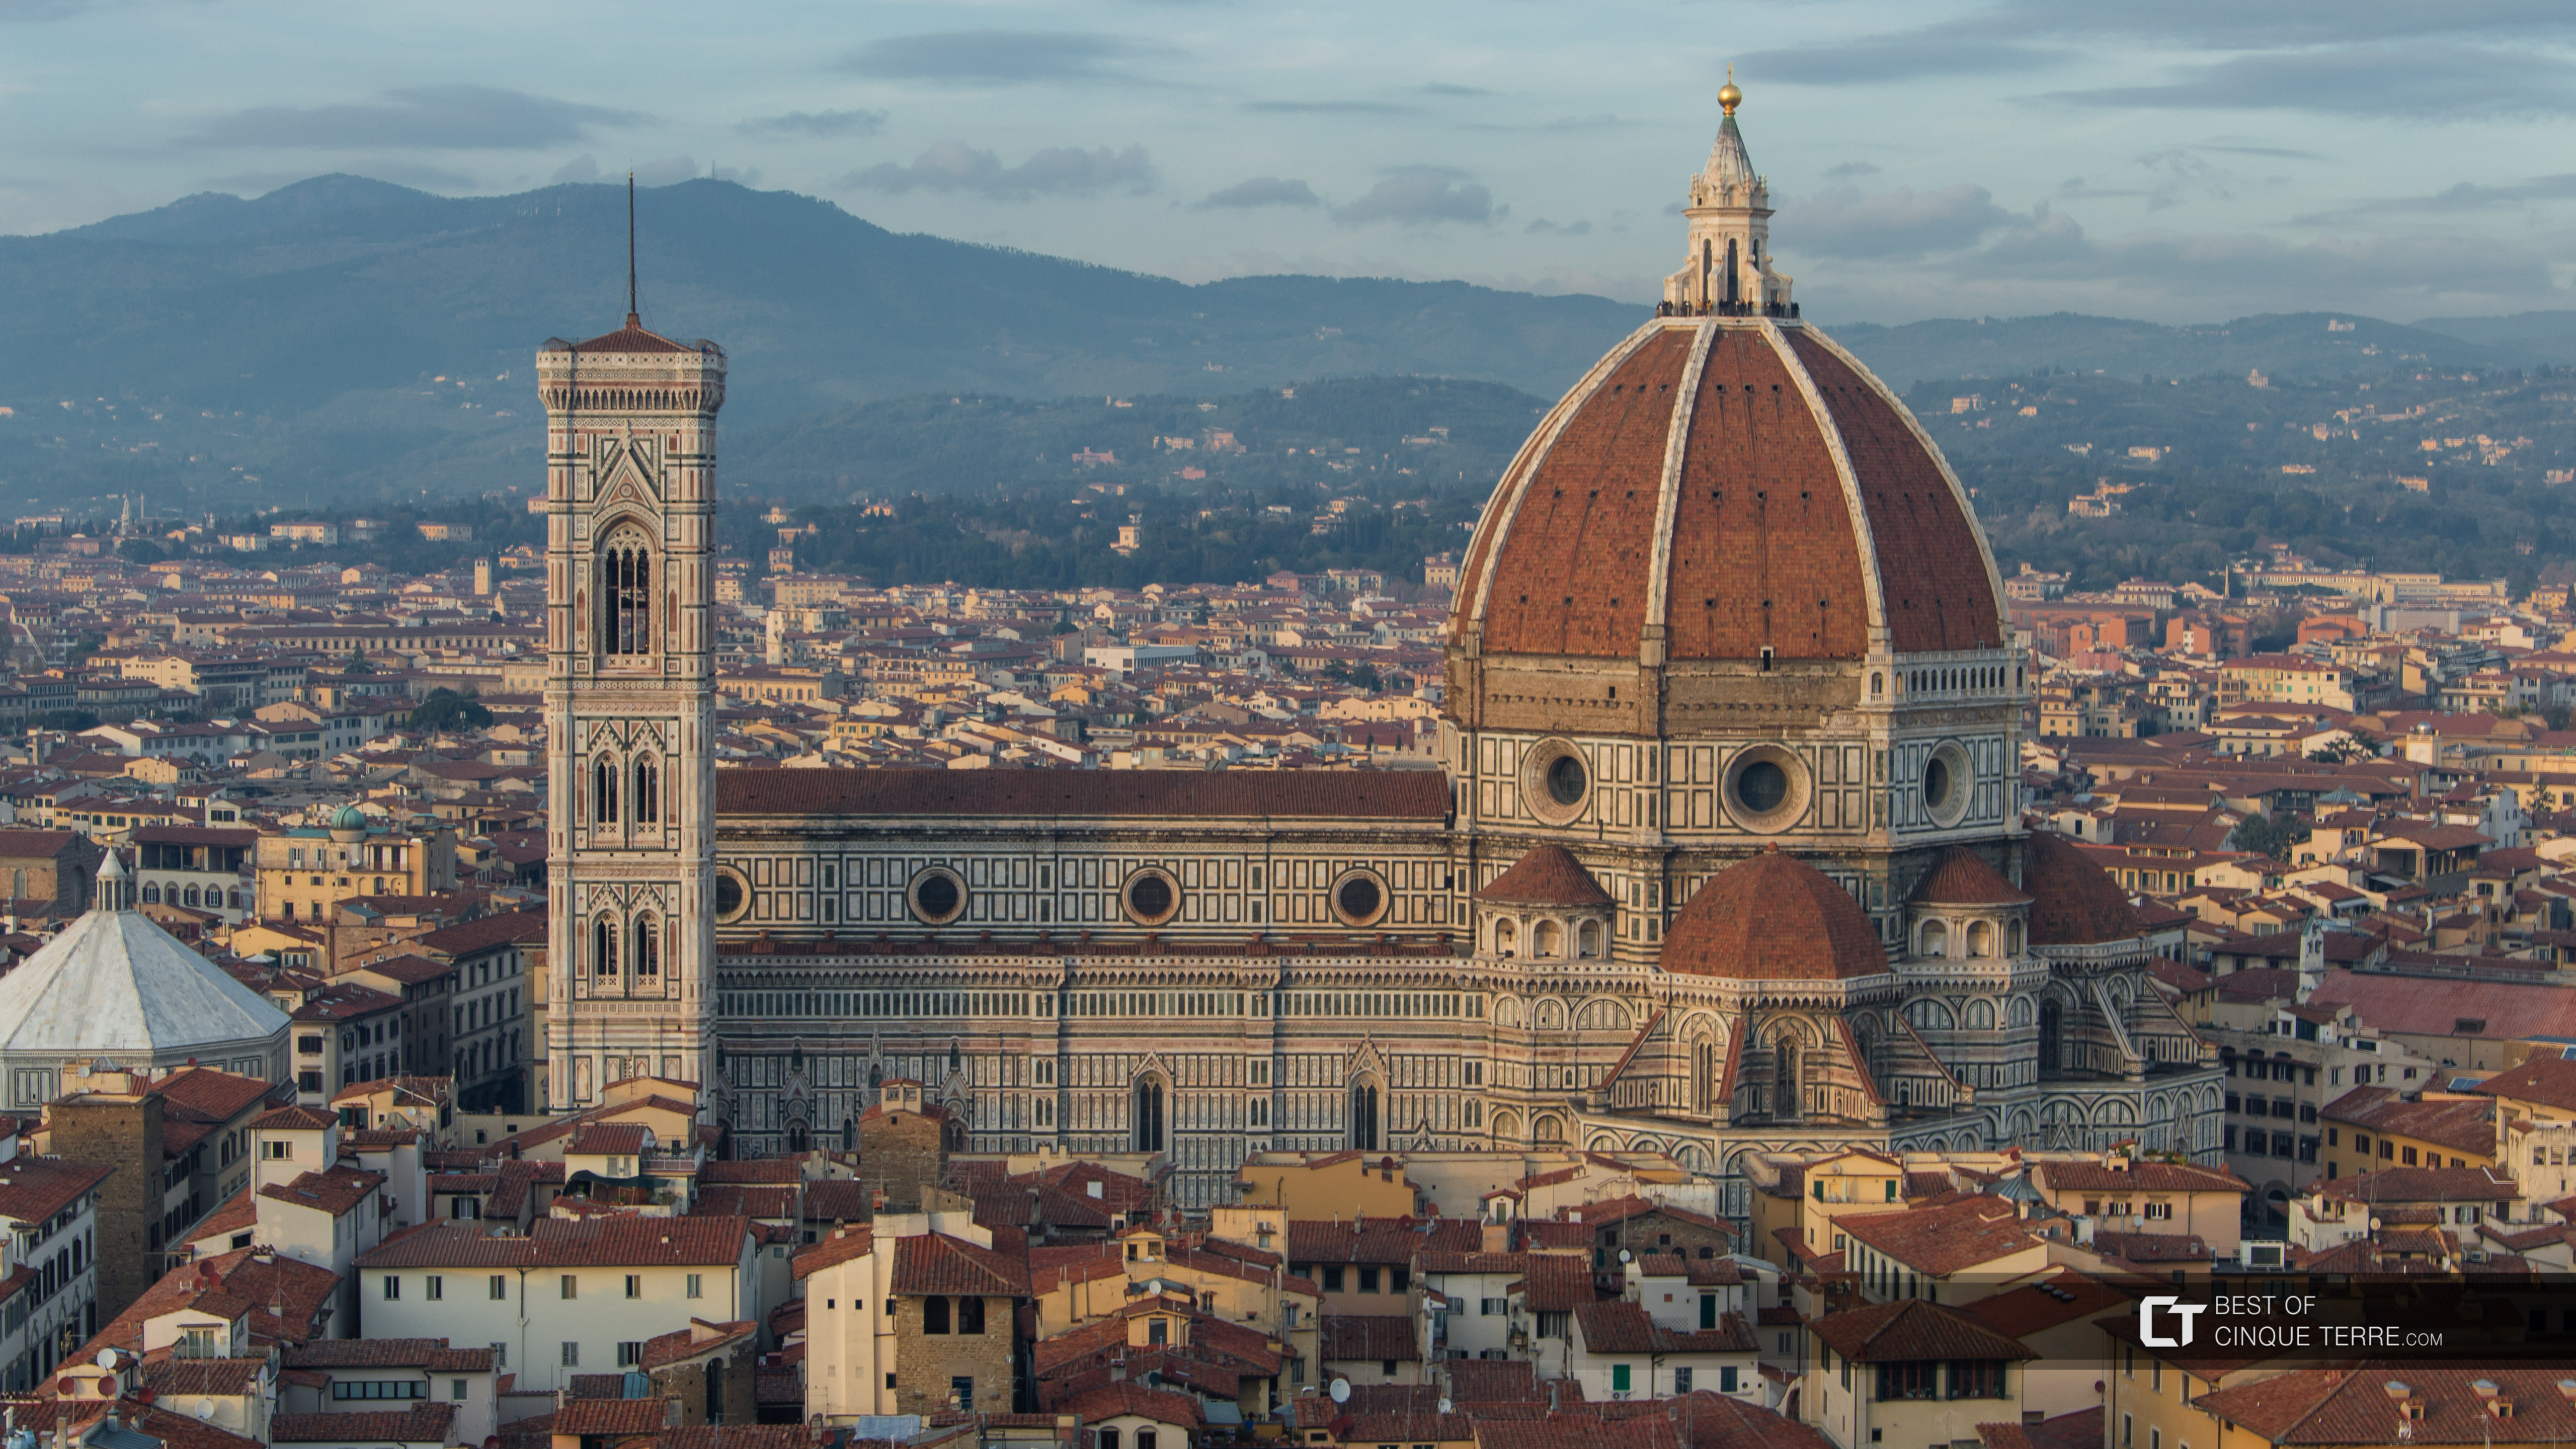 Cathedral of Santa Maria del Fiore seen from the Tower of Palazzo Vecchio, Florence, Italy